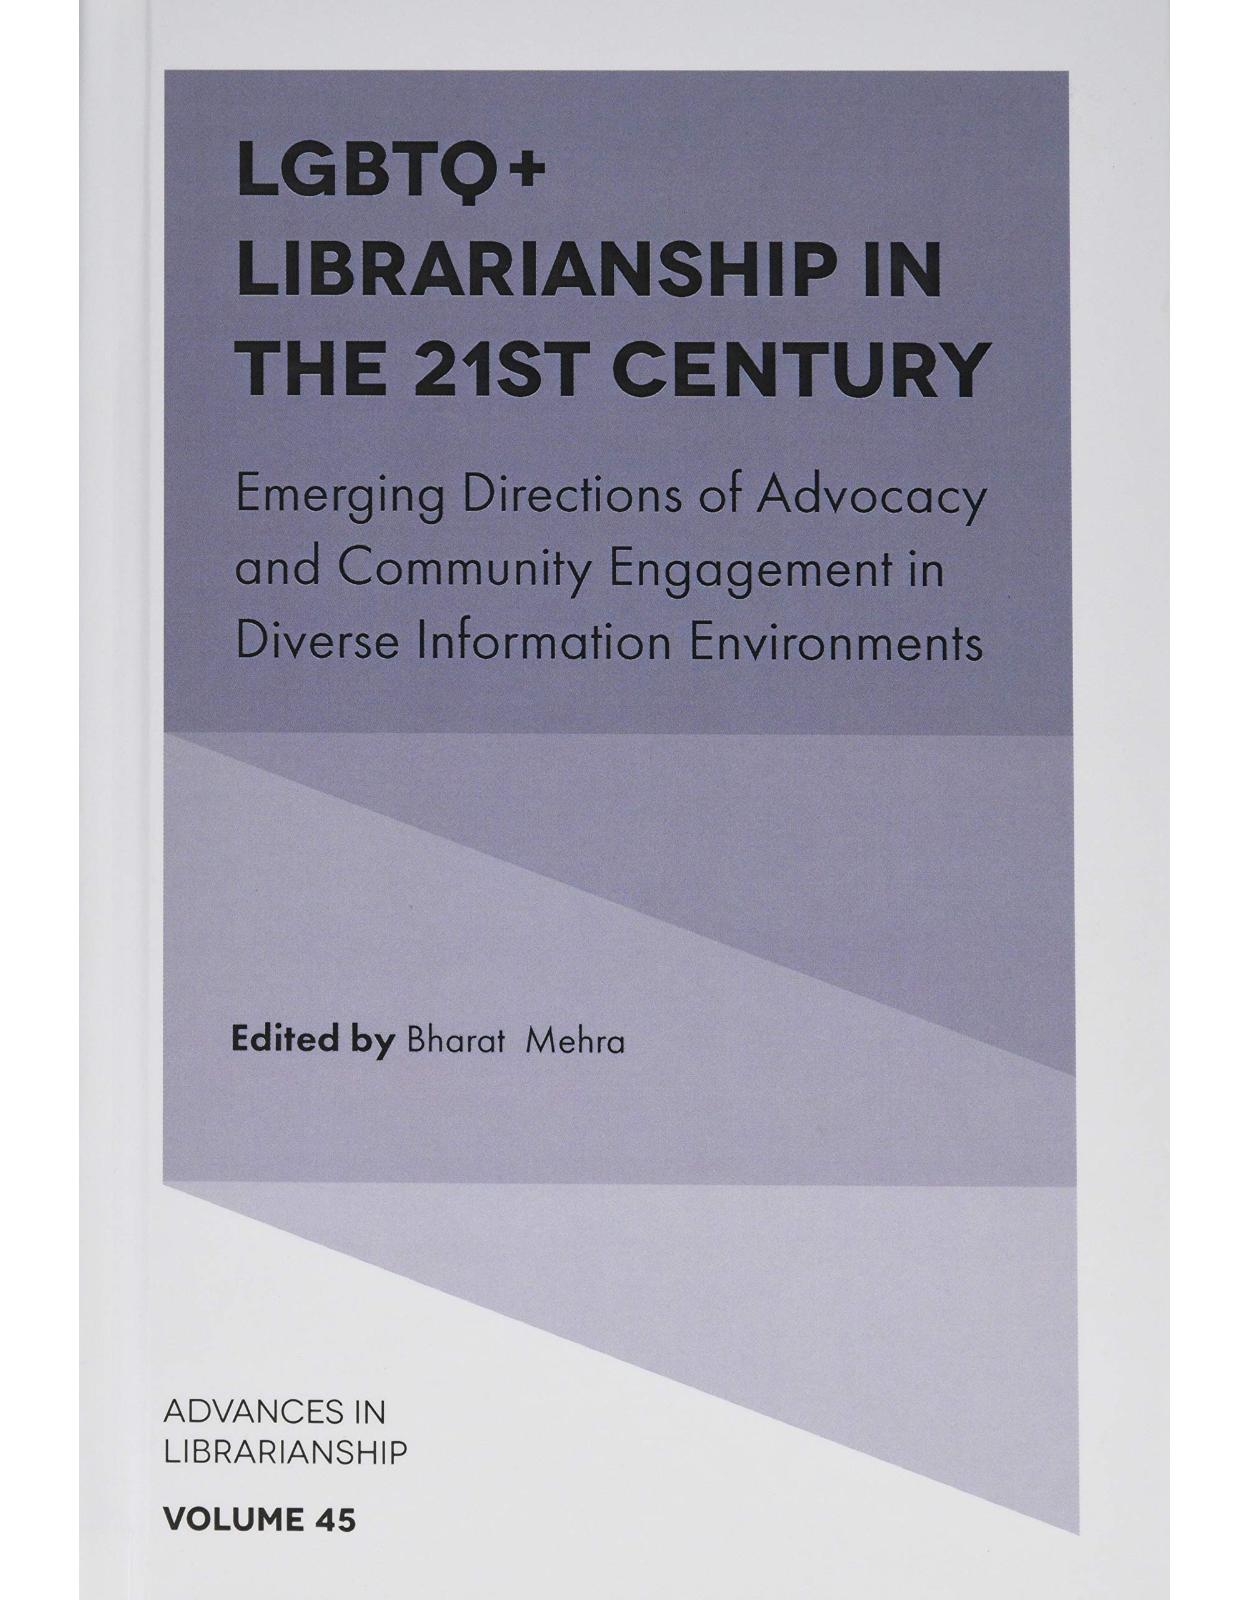 LGBTQ+ Librarianship in the 21st Century: Emerging Directions of Advocacy and Community Engagement in Diverse Information Environments (Advances in Librarianship)